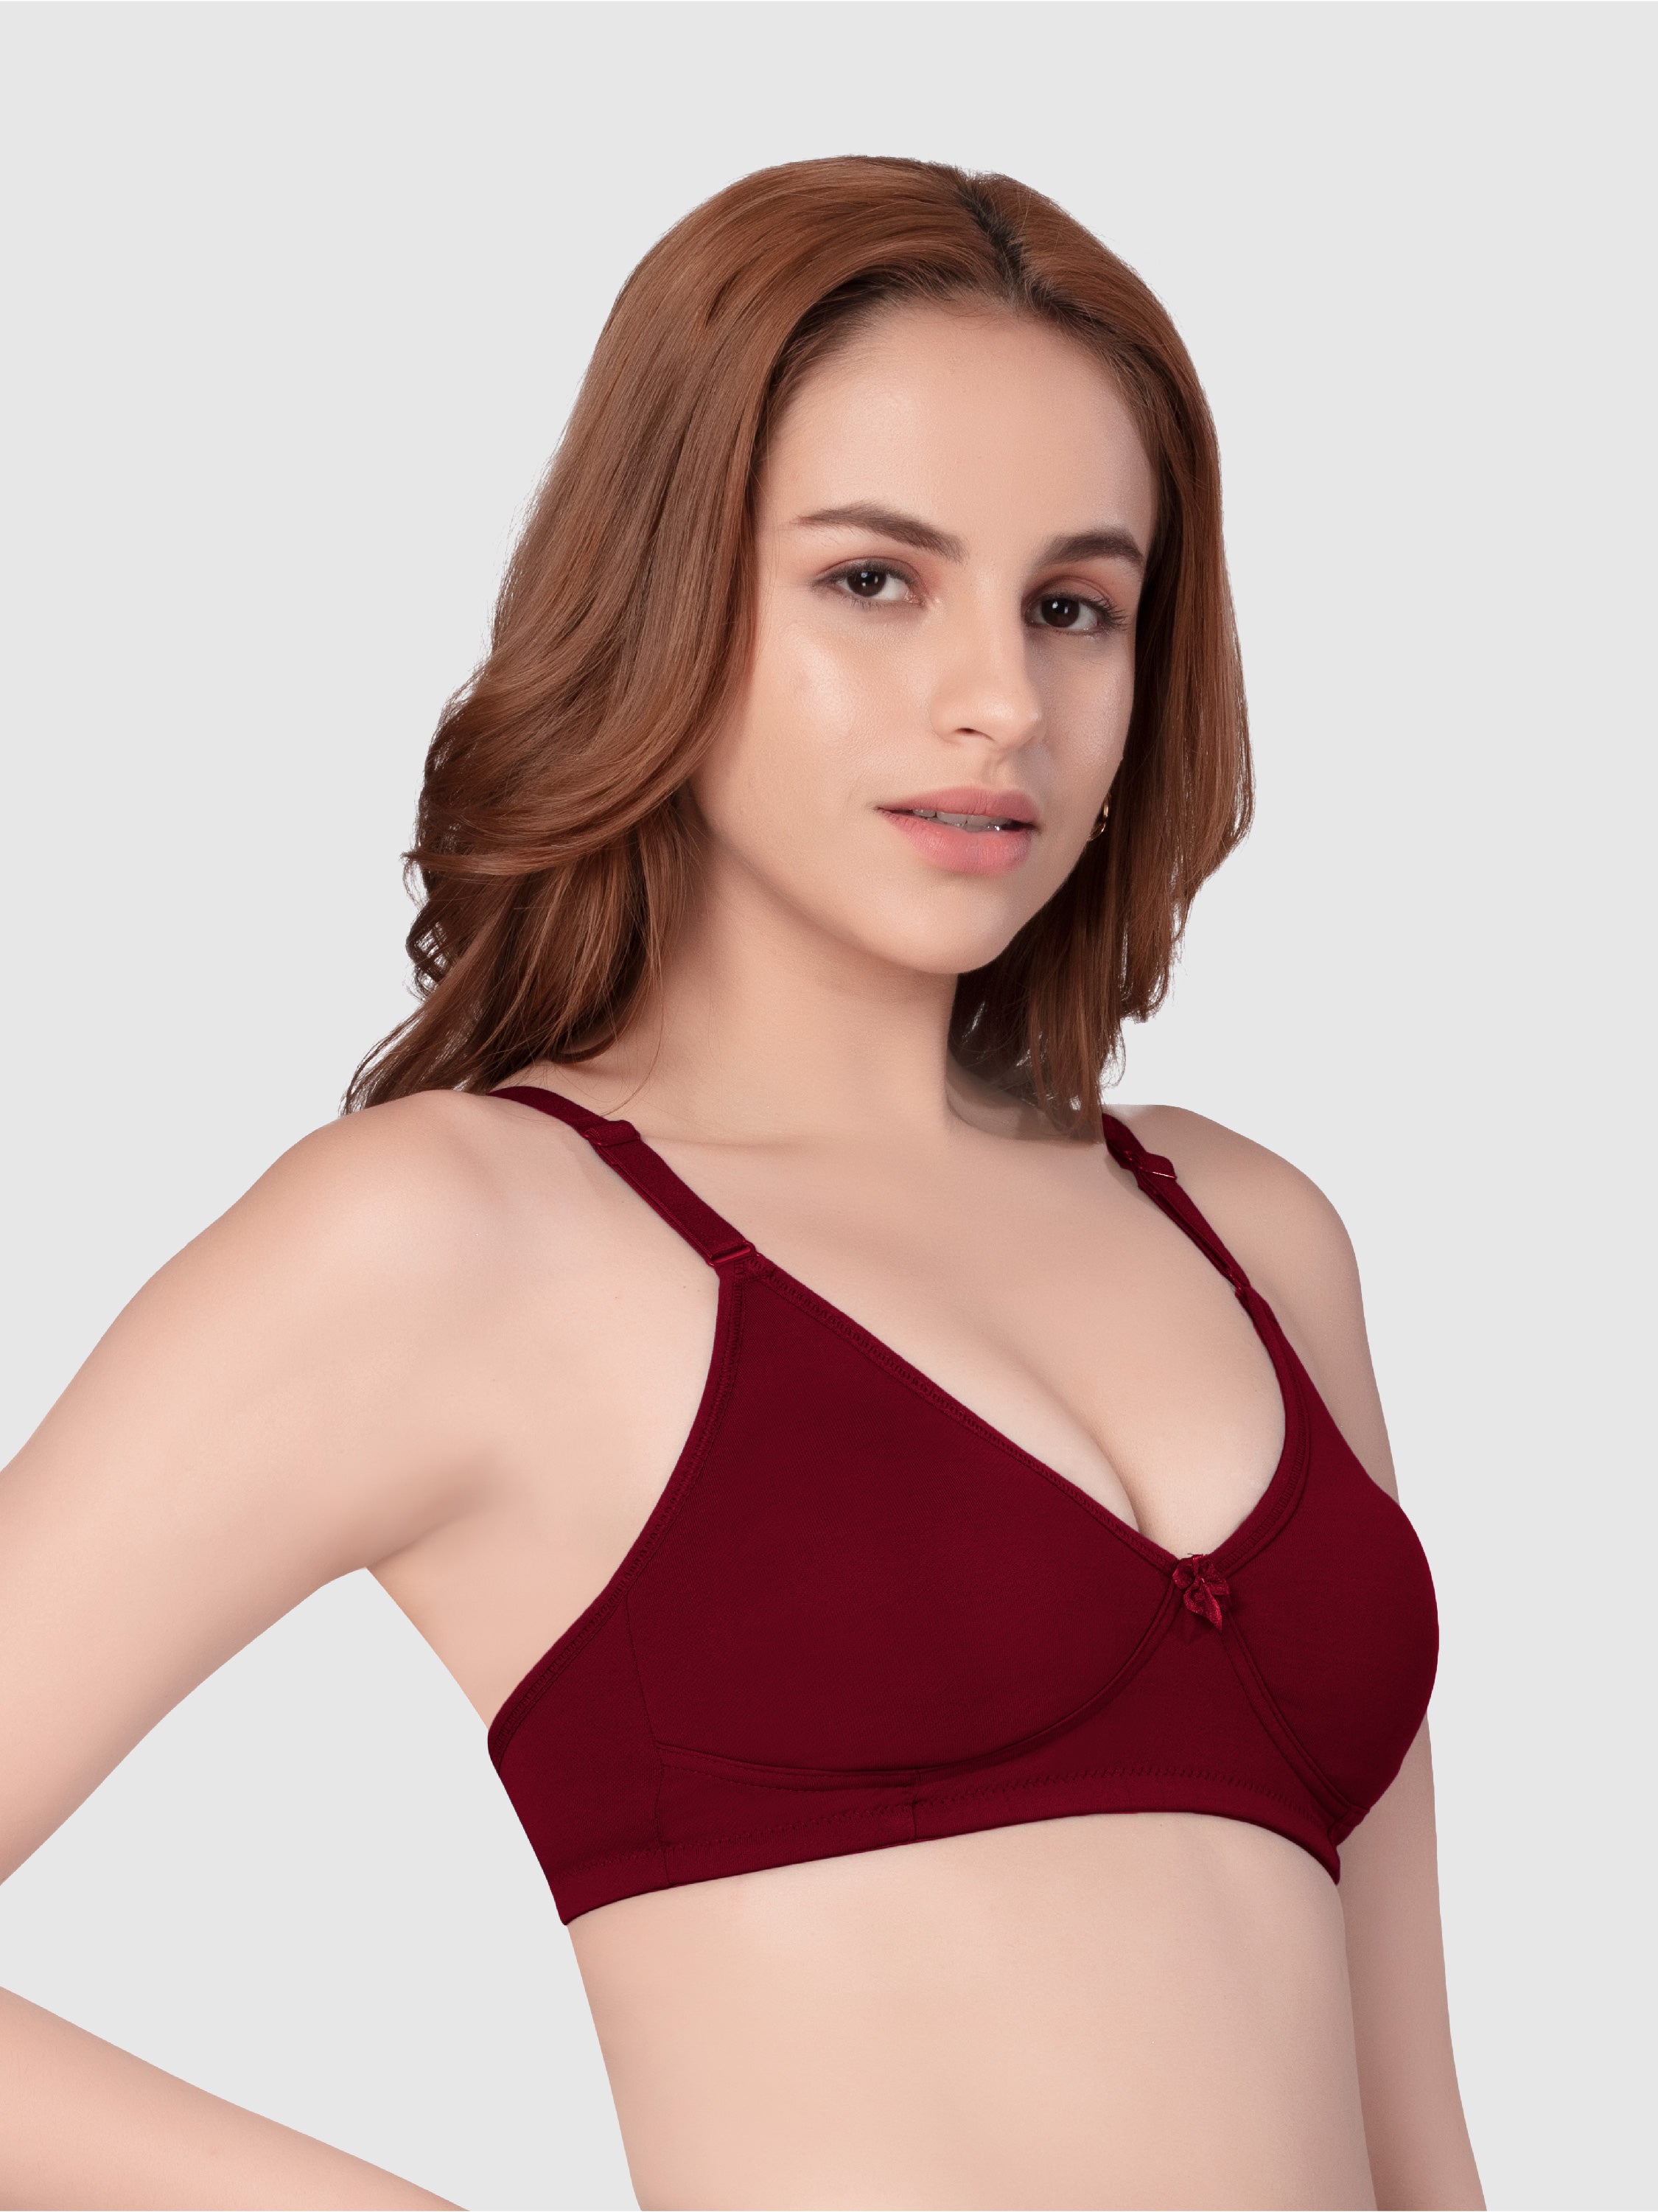 Daisy Dee Dusty maroon Non Padded Non-Wired Full Coverage T-Shirt Bra - NSNA-Dusty Maroon